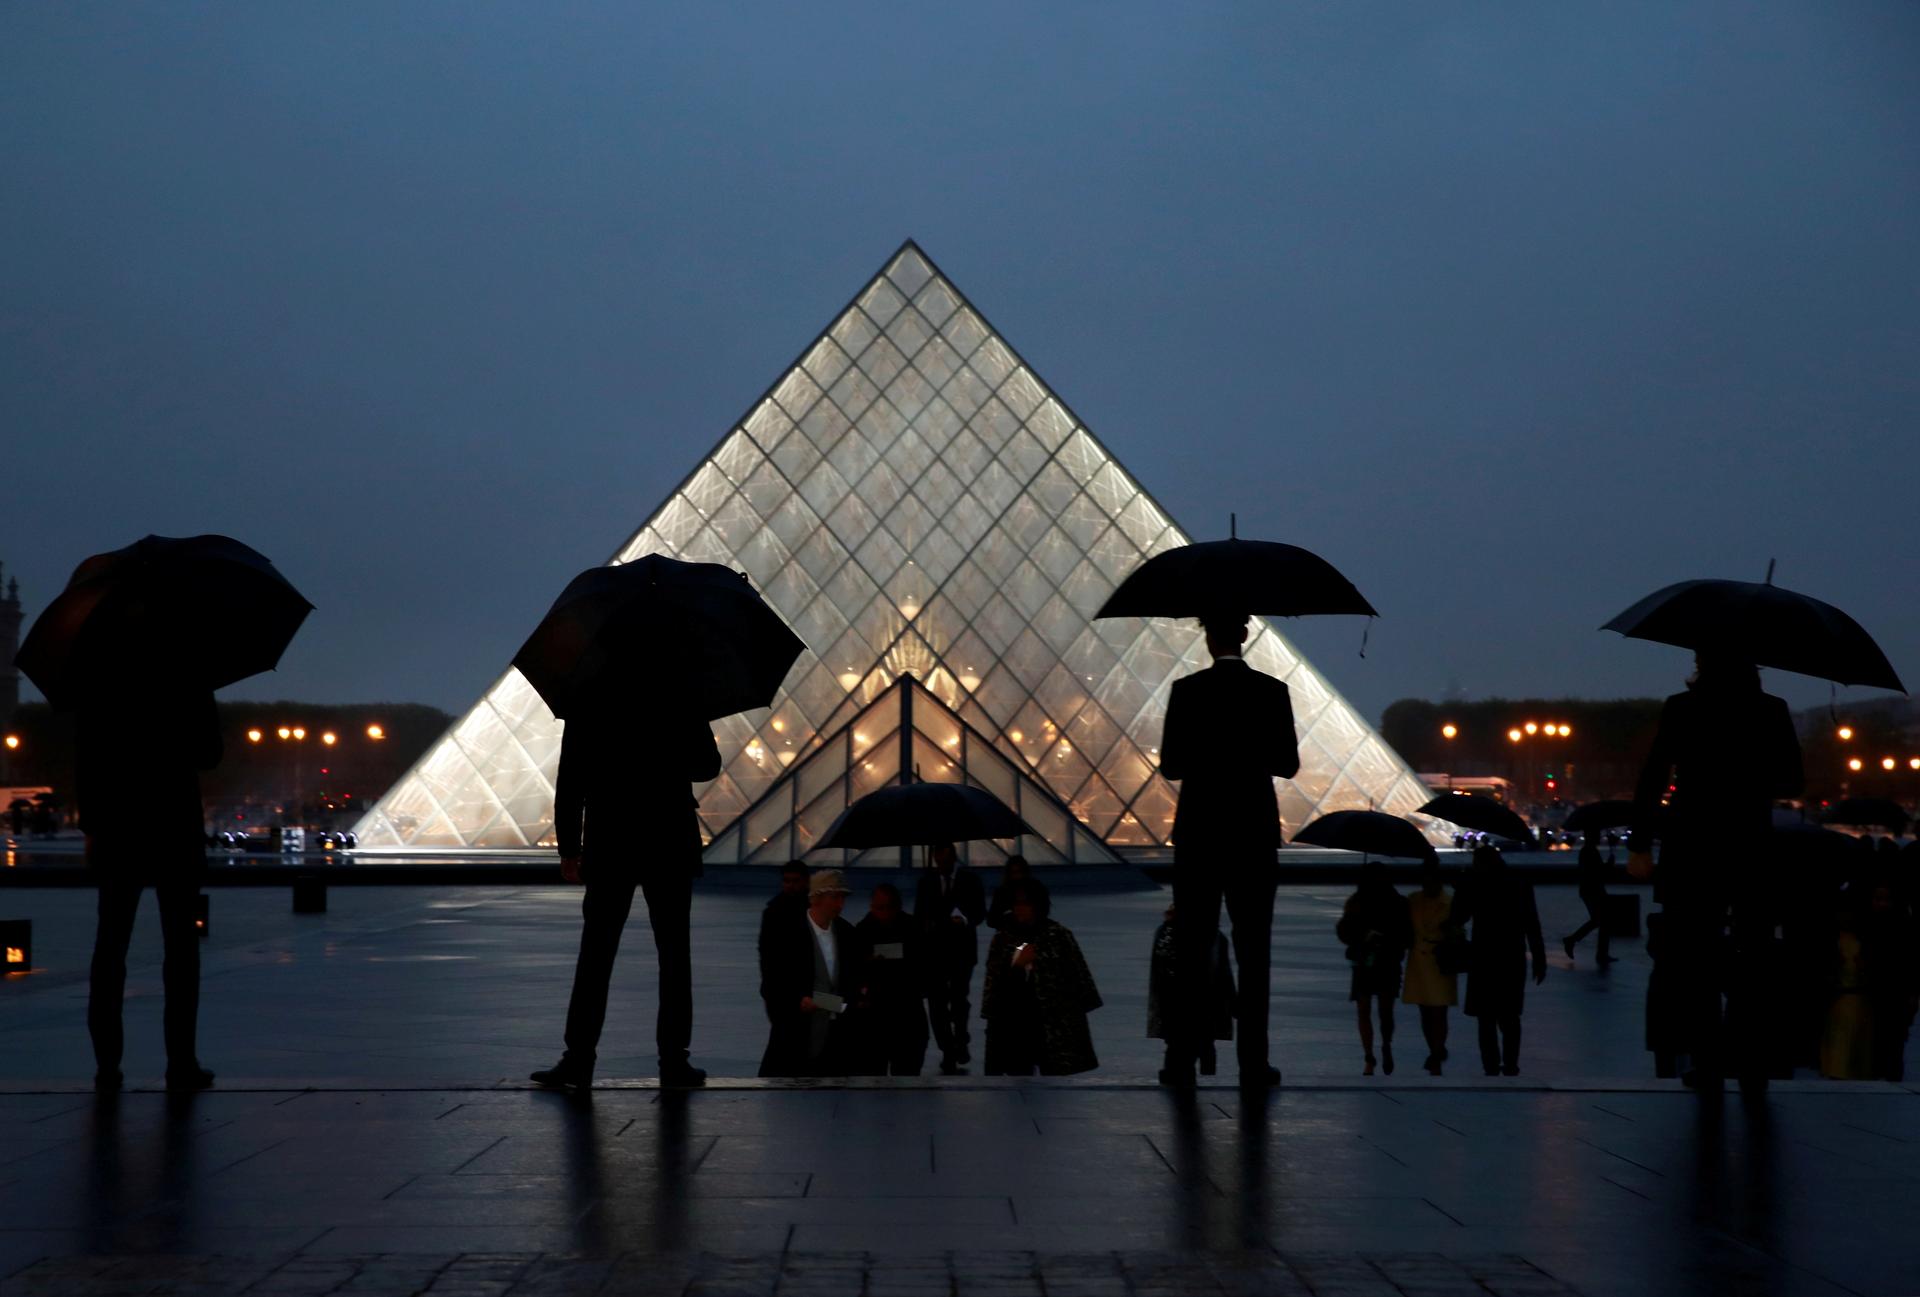 Silhouetted people with umbrellas stand in front of the Louvre pyramid at night.